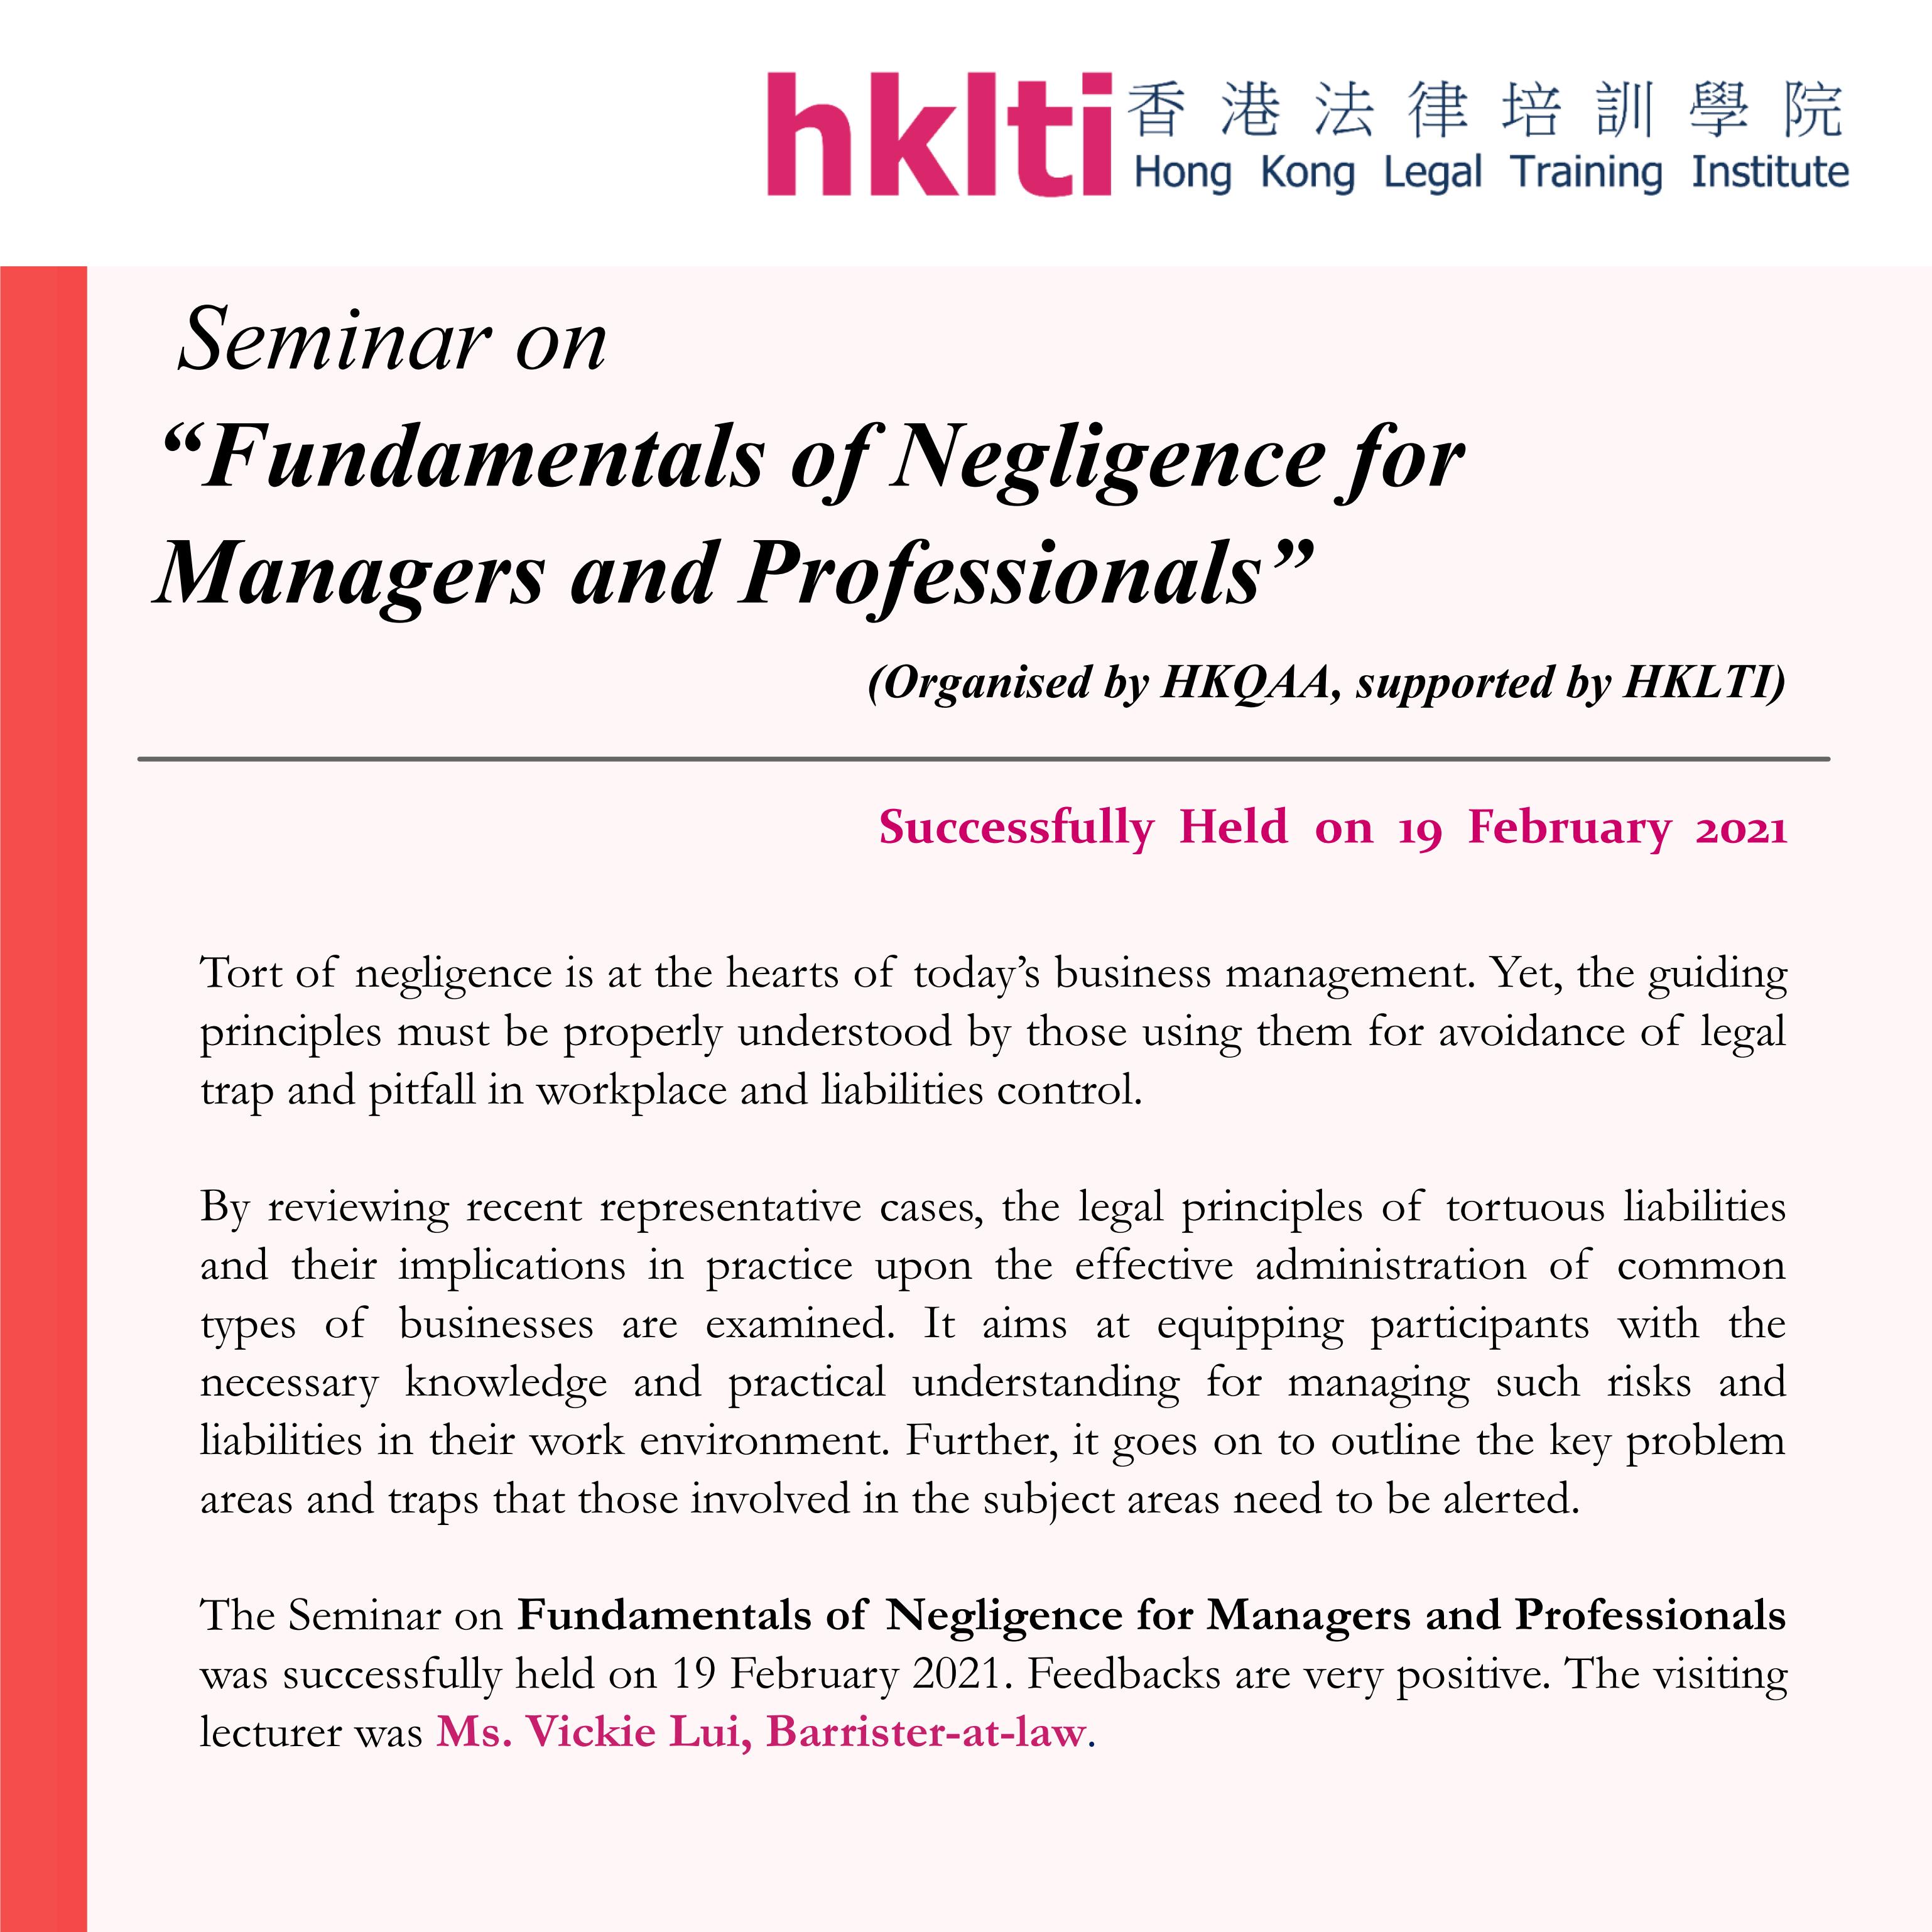 hklti hkqaa legal seminar on fundamentals of negligence for managers and professionals seminar report 20210219